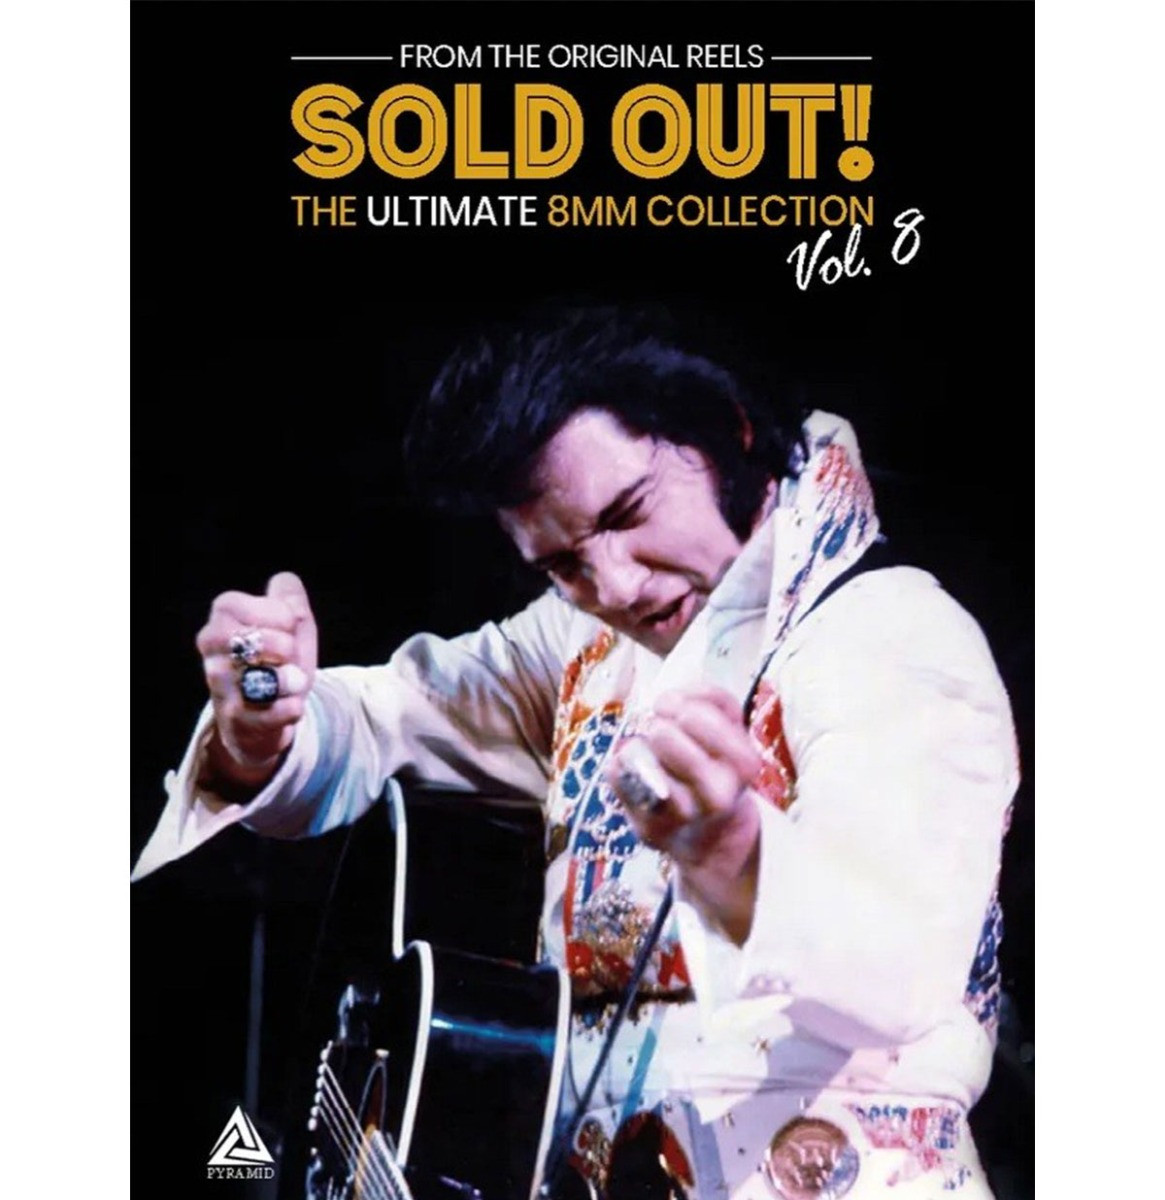 Elvis Presley: Sold Out! The Ultimate 8MM Collection Vol. 8 - 2 DVD Set